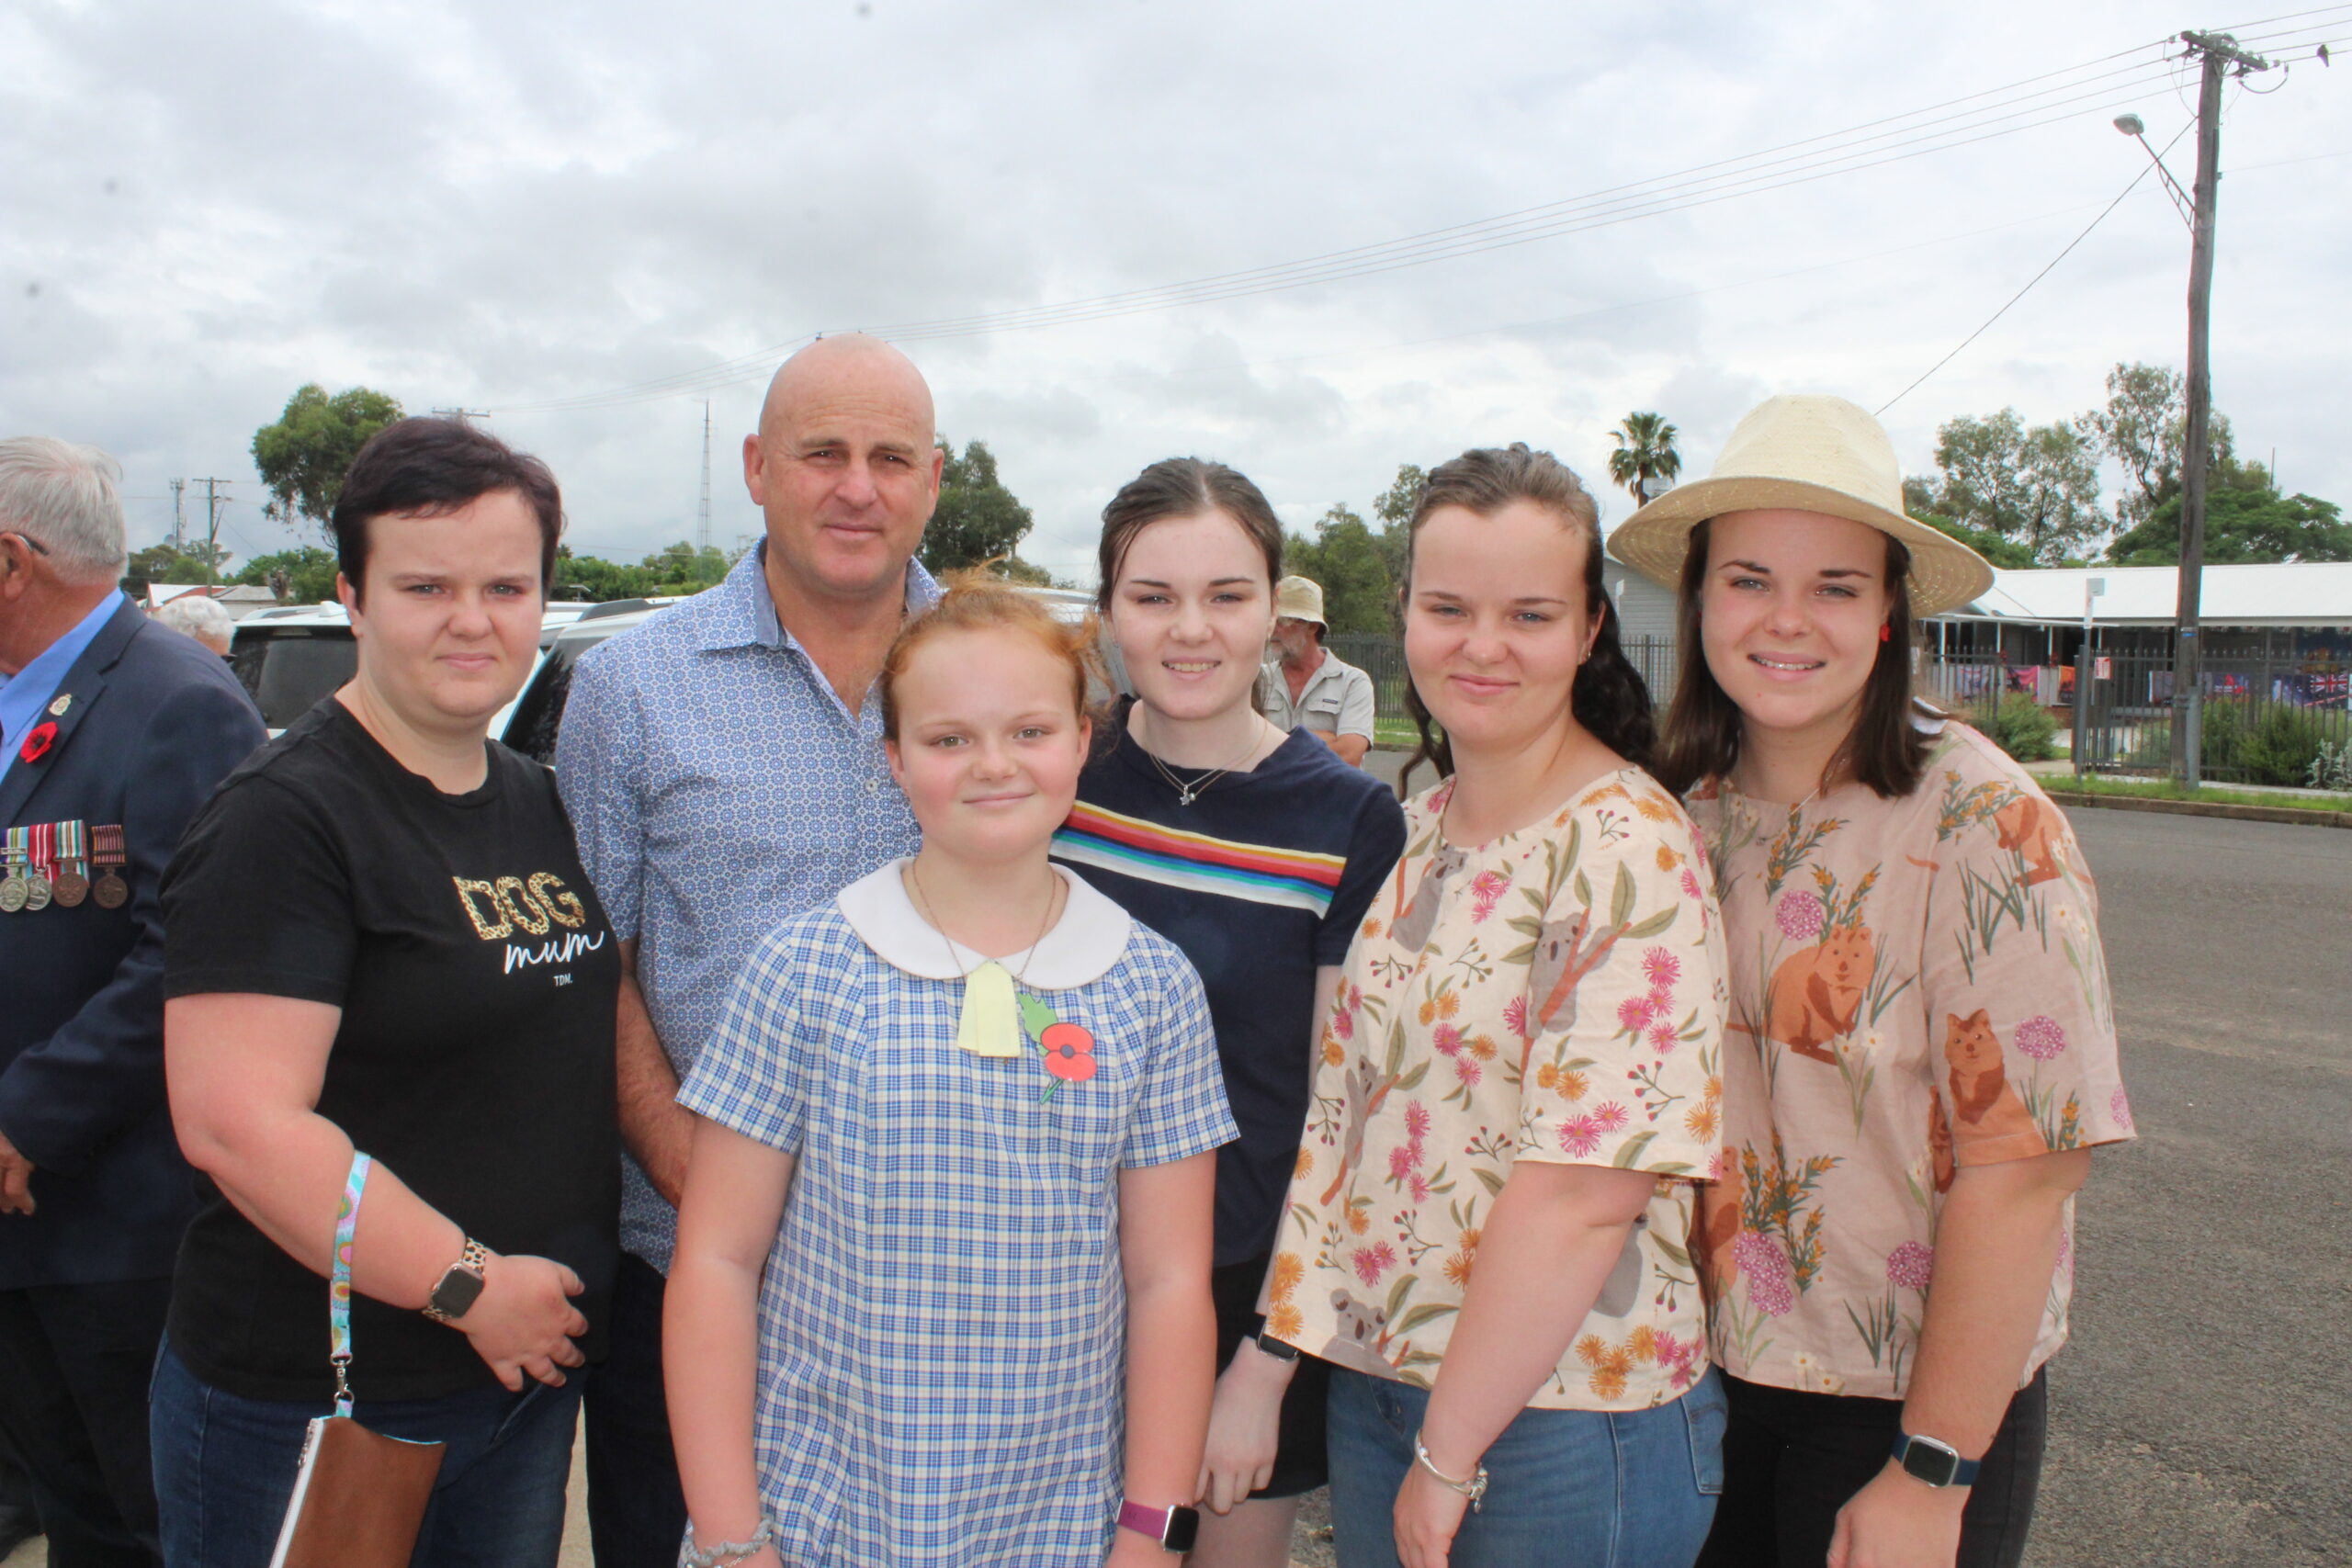 The Whelan family attending their last Remembrance Commemoration service in Boggabri prior to moving to Queensland. Ally, Leon, Victoria, Scarlett, Zara and Larissa.